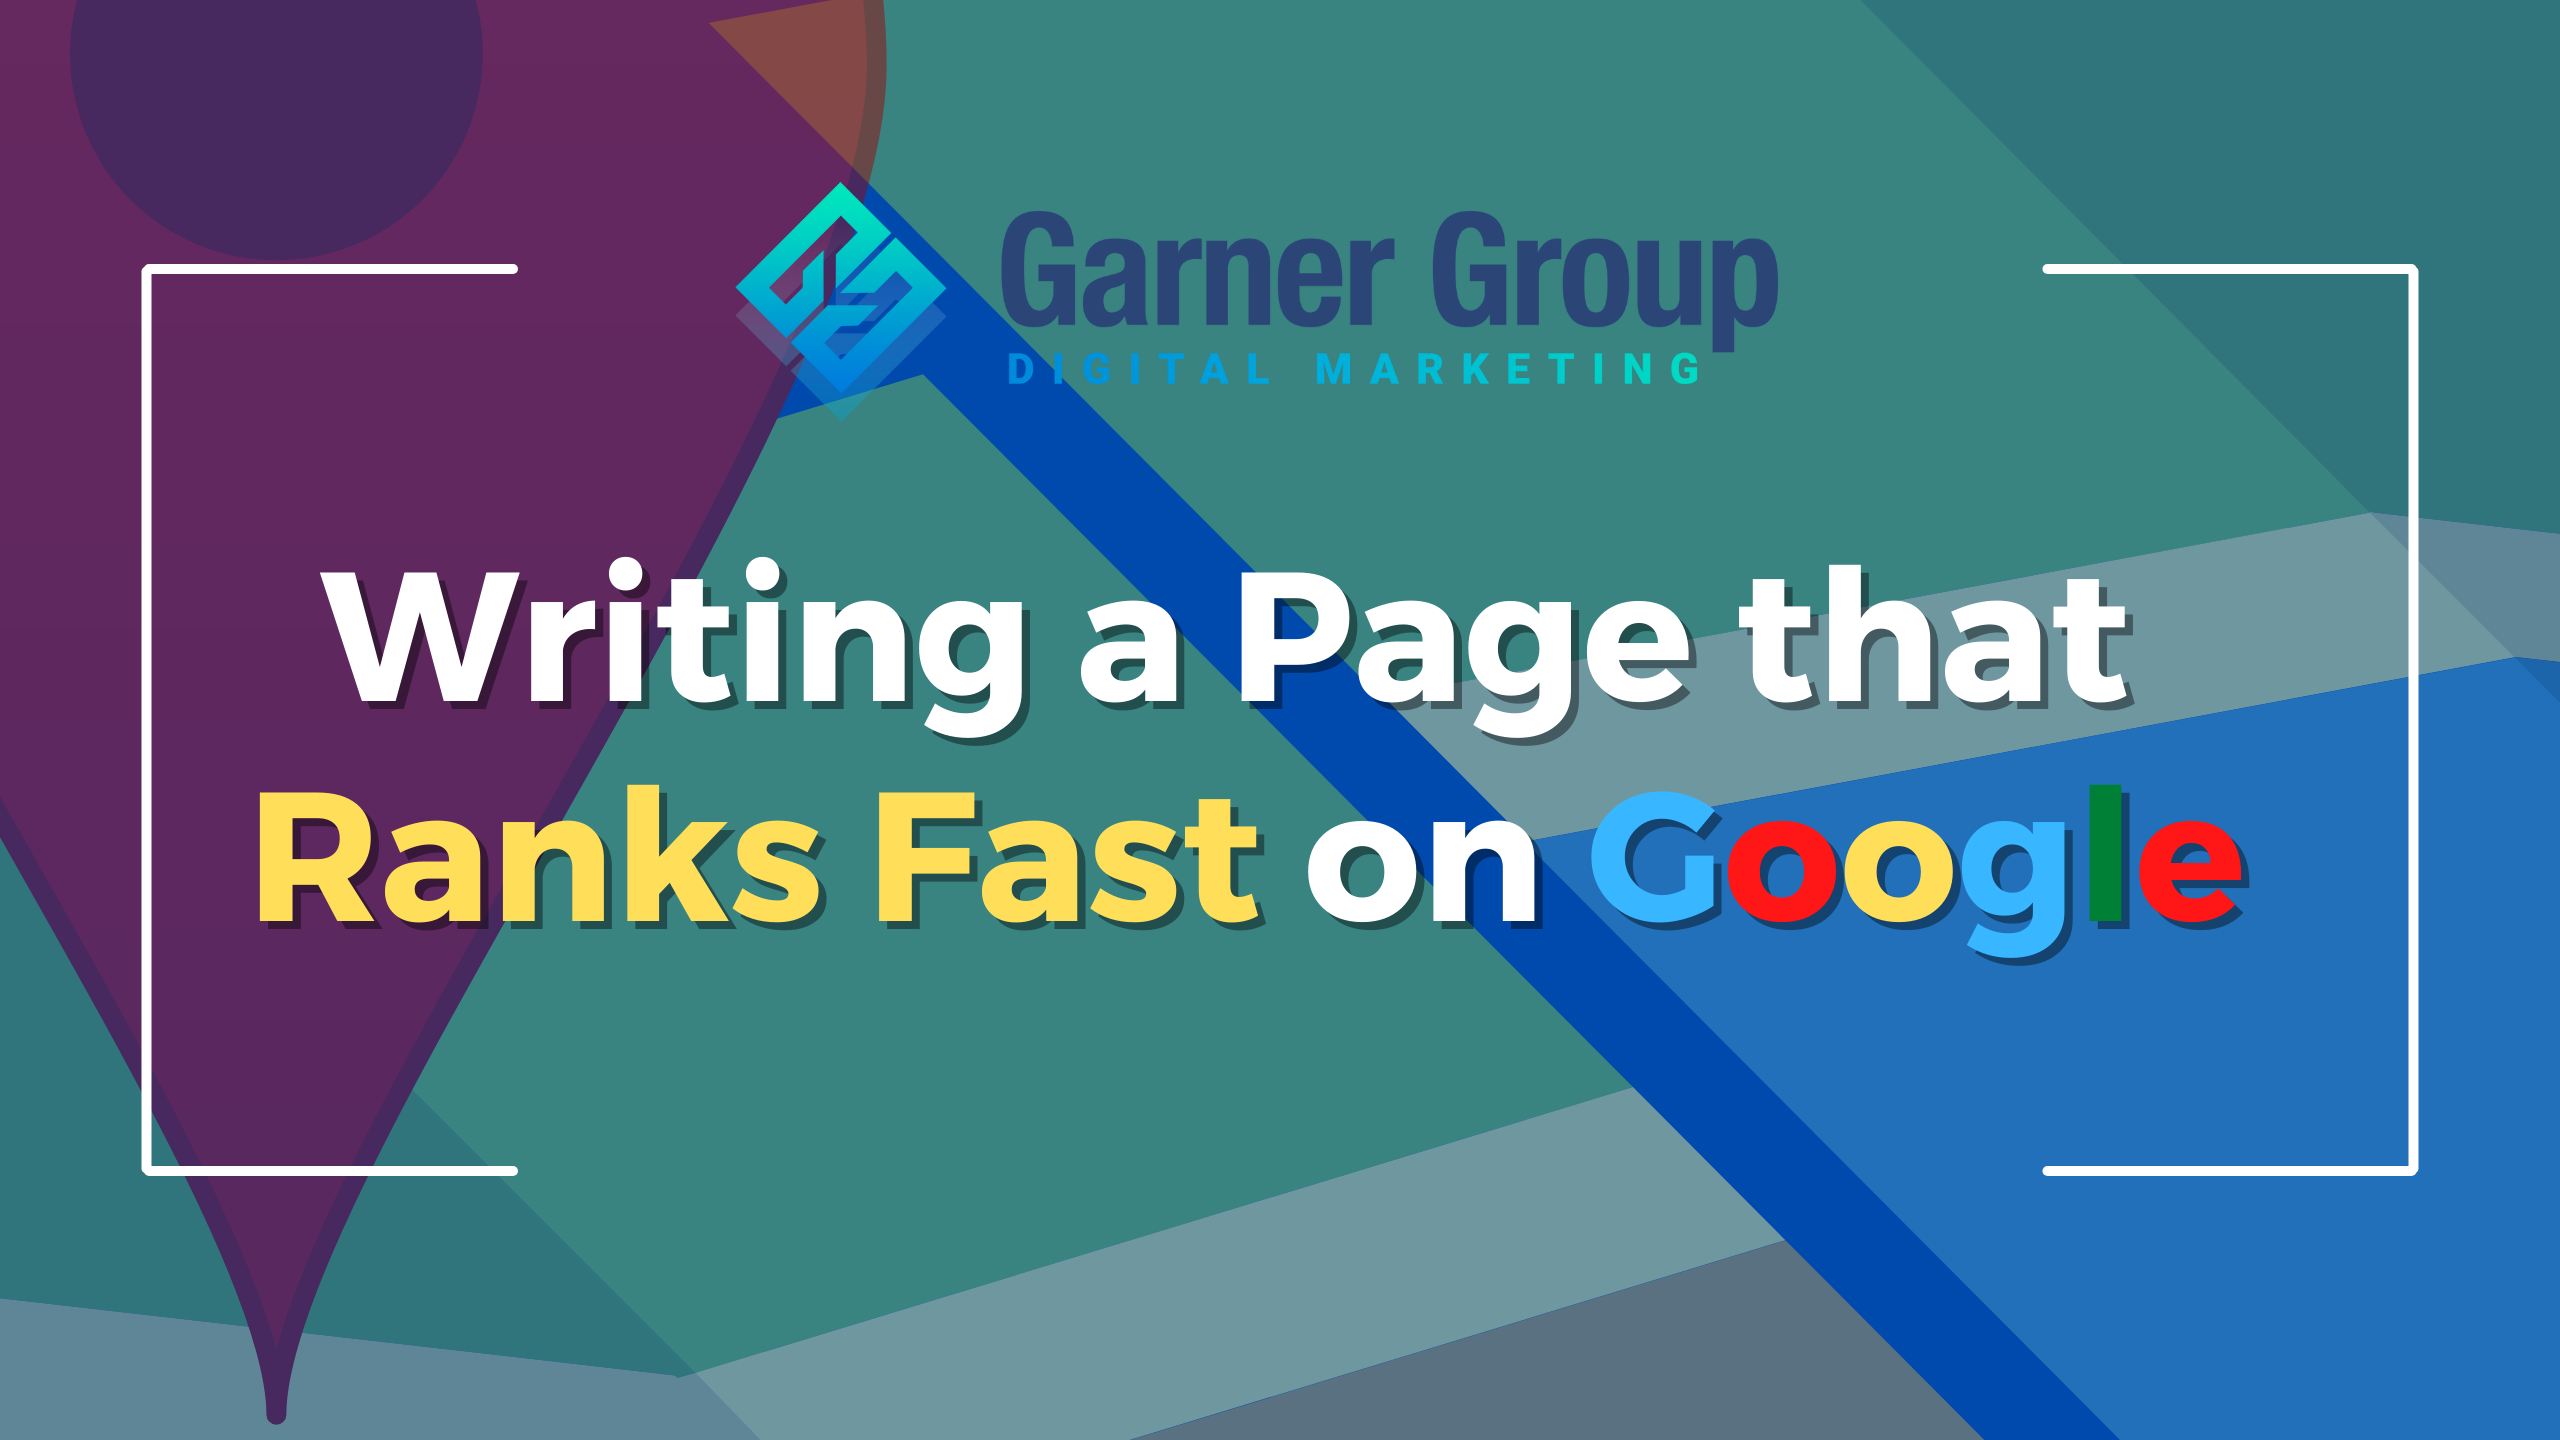 Writing a Page that Ranks Fast on Google